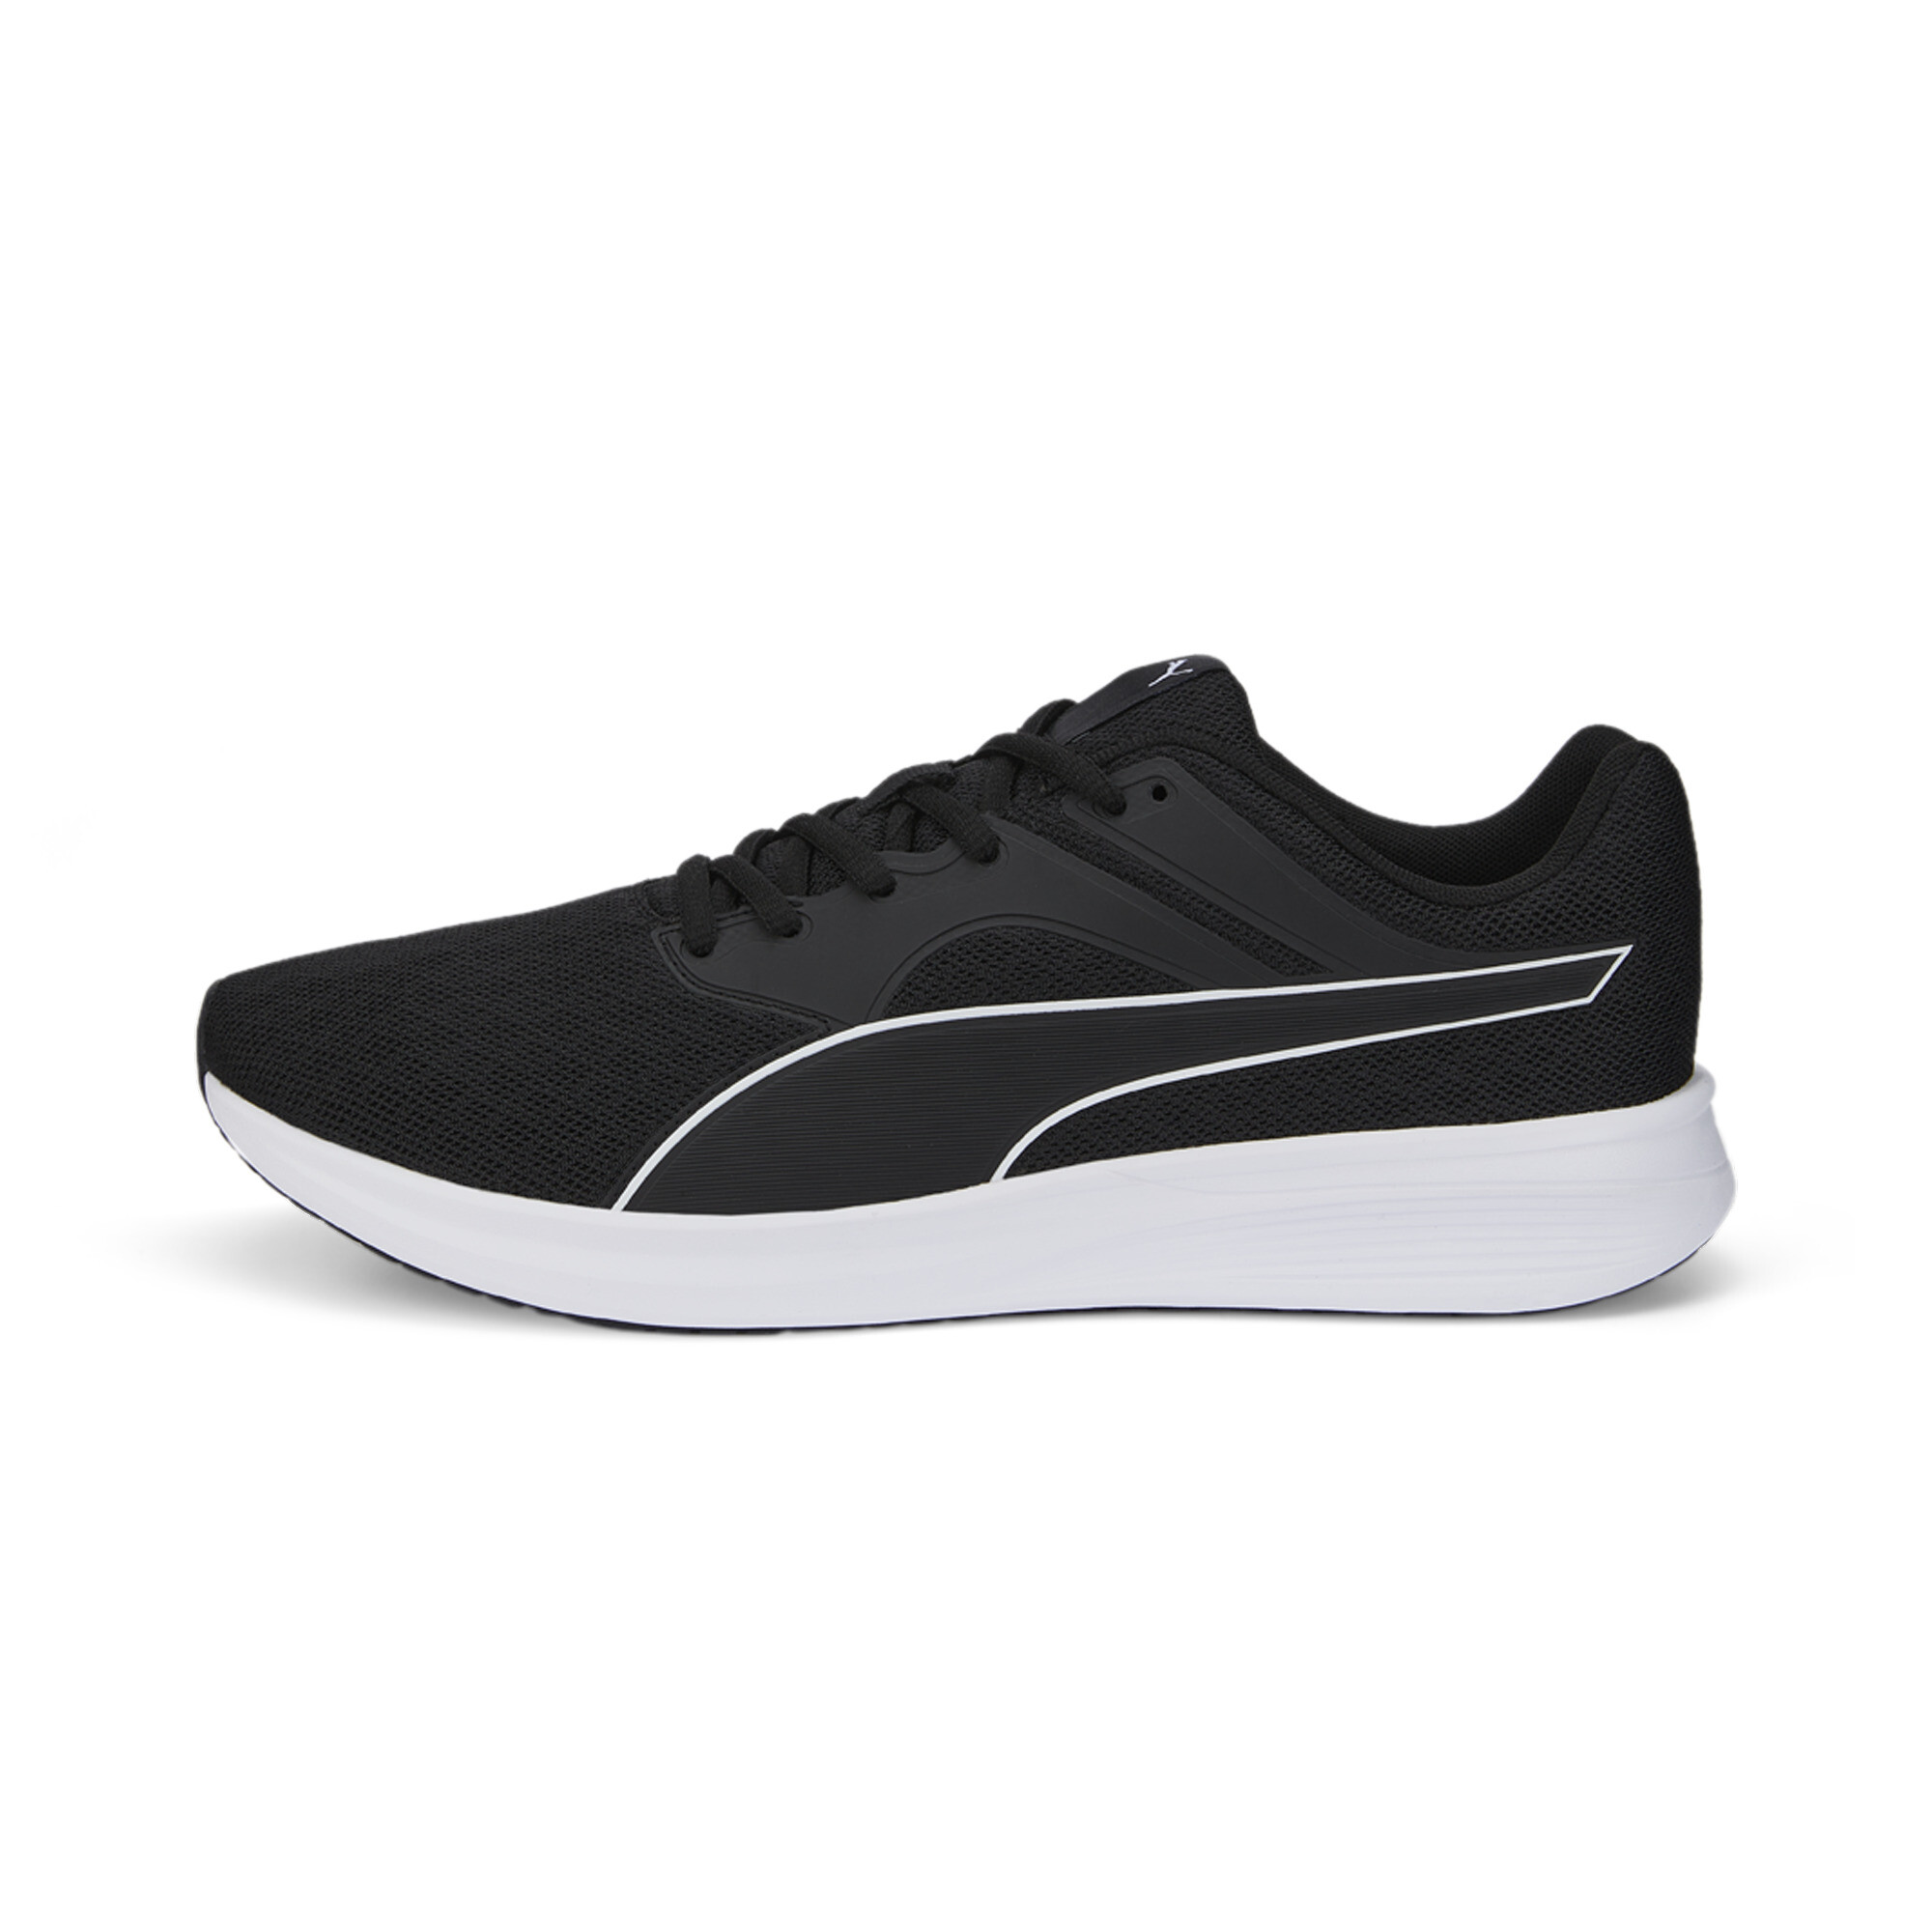 Puma Transport Running Shoes, Black, Size 36, Shoes